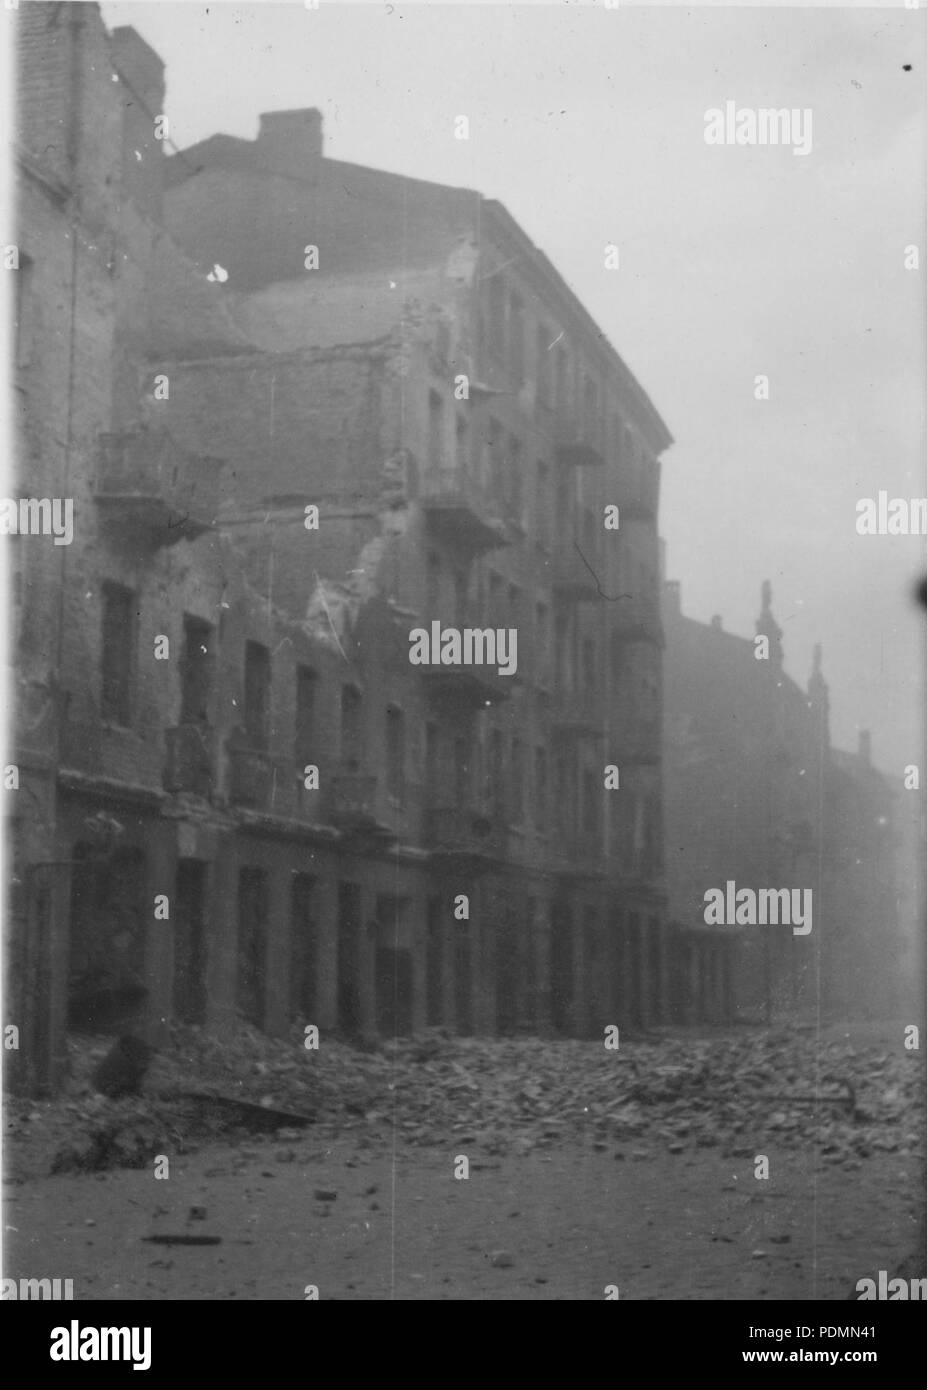 Stroop Report 2/4 Record Group 038 United States Counsel for the Prosecution of Axis Criminality; United States Exhibits, 1933-46 HMS Asset Id: HF1-88454435 ReDiscovery Number: 06315 347 Stroop Report - Warsaw Ghetto Uprising - NARA45 Stock Photo